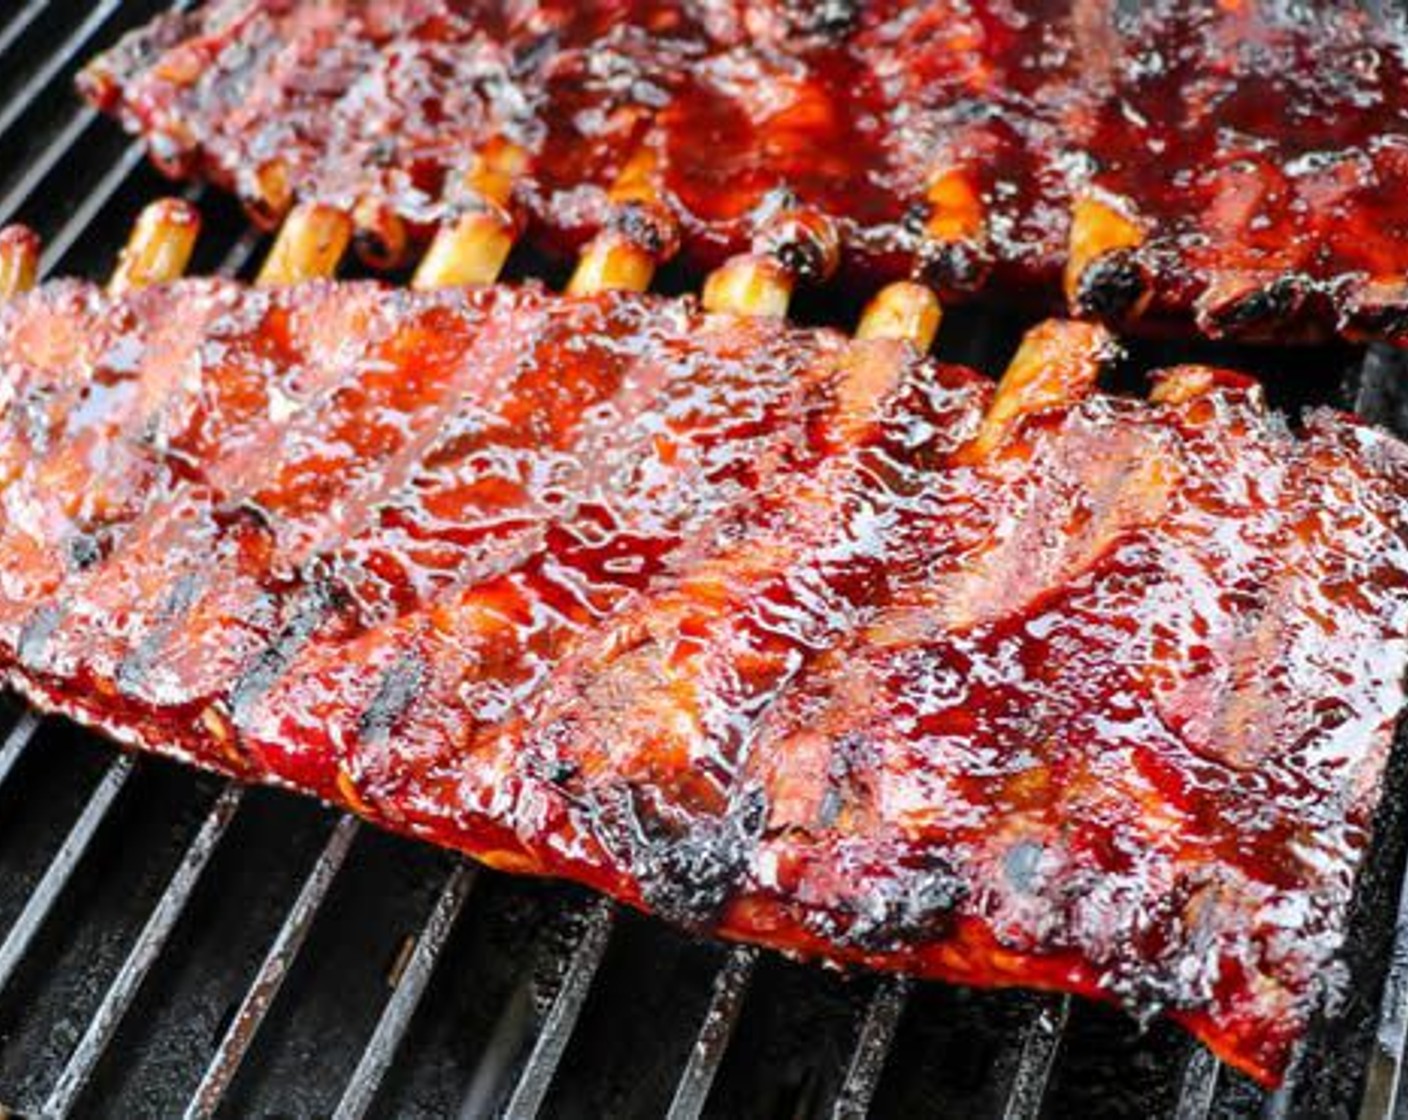 step 9 Grill the ribs for 3-4 minutes on each side and serve.